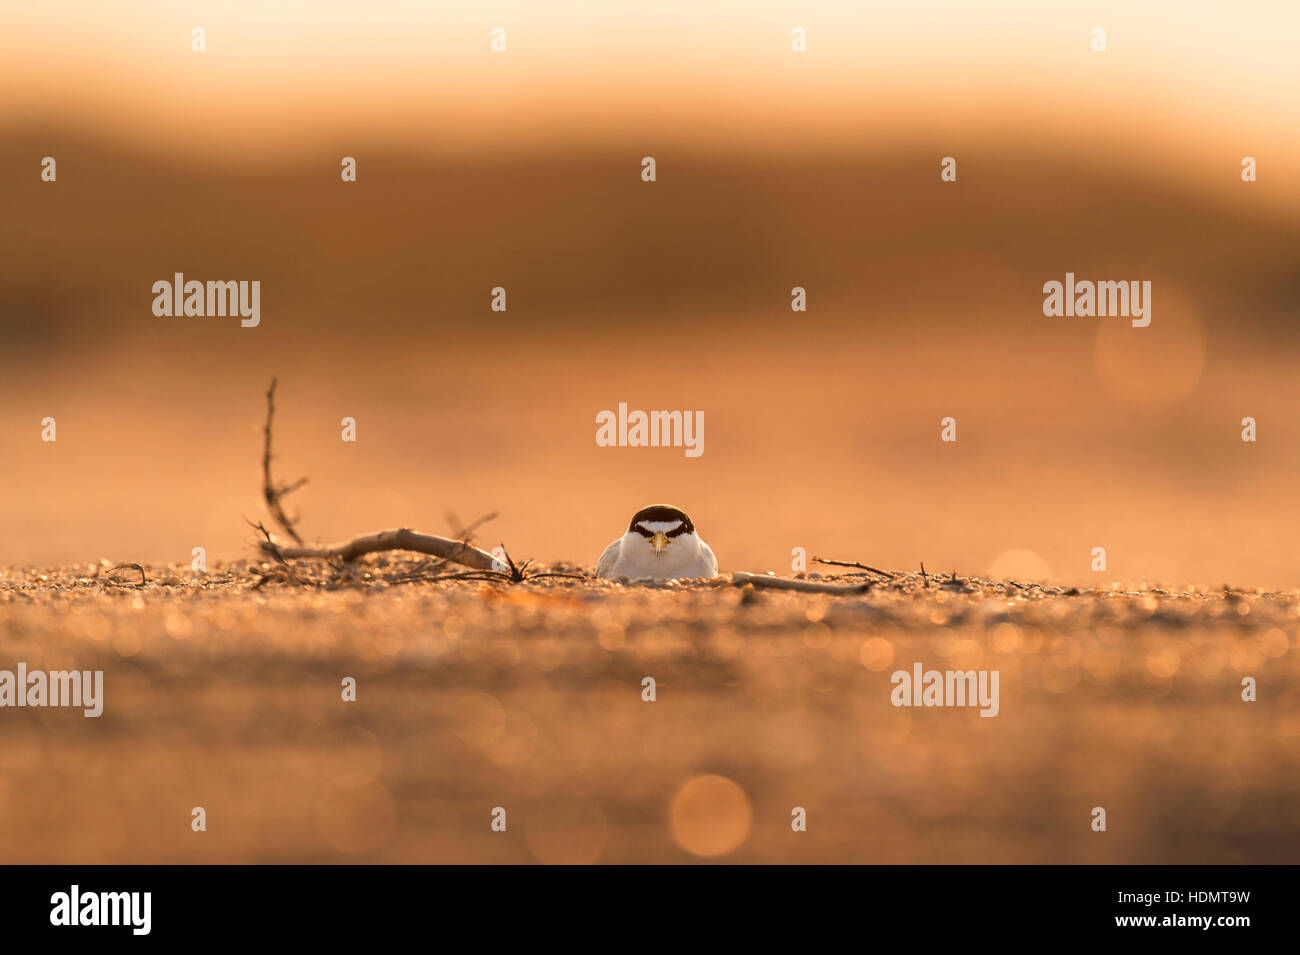 An endangered Least Tern settles in on her nest on a sandy beach as the sun rises behind her. Stock Photo